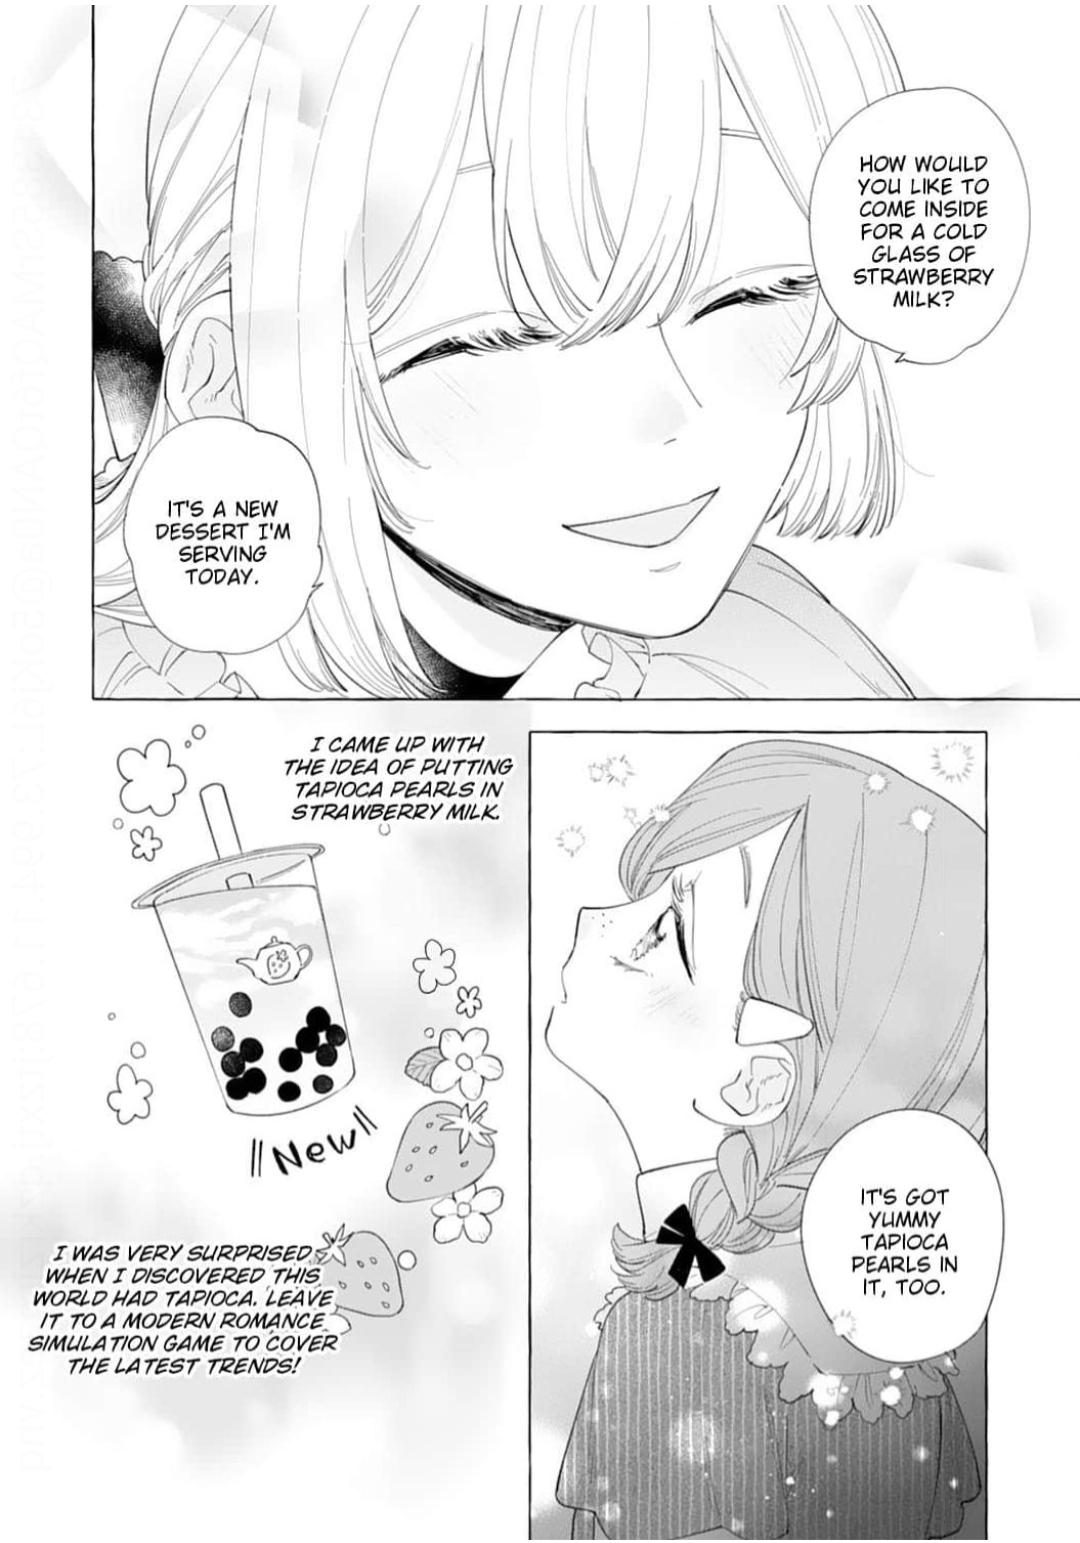 I’M A Banished Villainess, But I’M Accompanied By A Fluffy Creature?! My Peaceful Life Starts - chapter 6 - #6